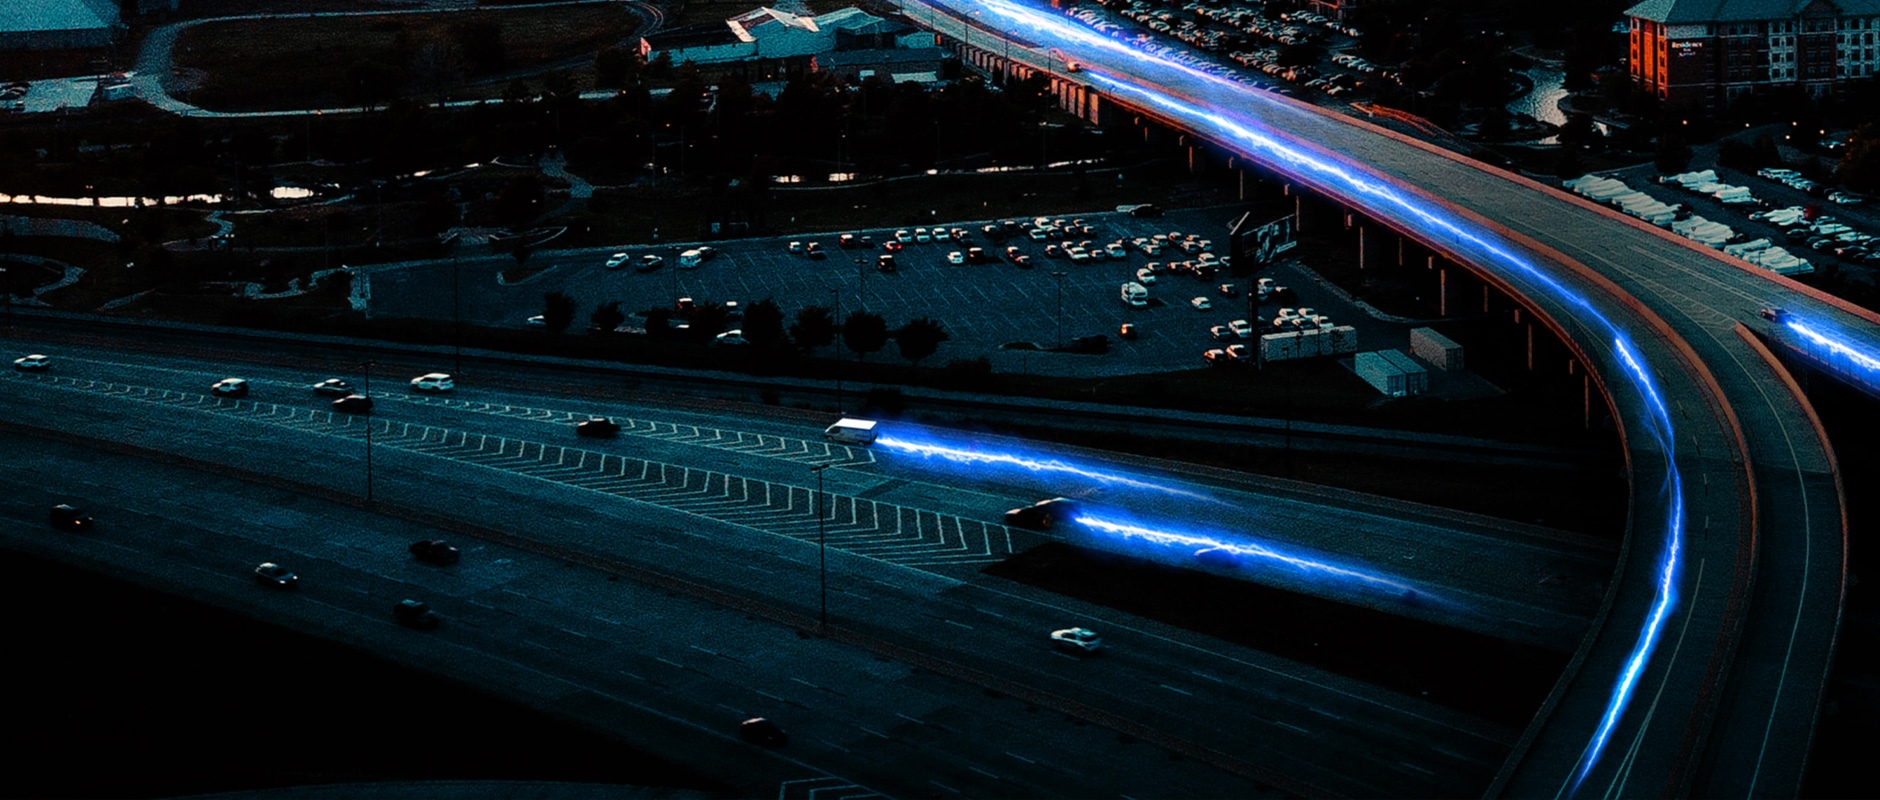 Night cityscape of vehicles on highway